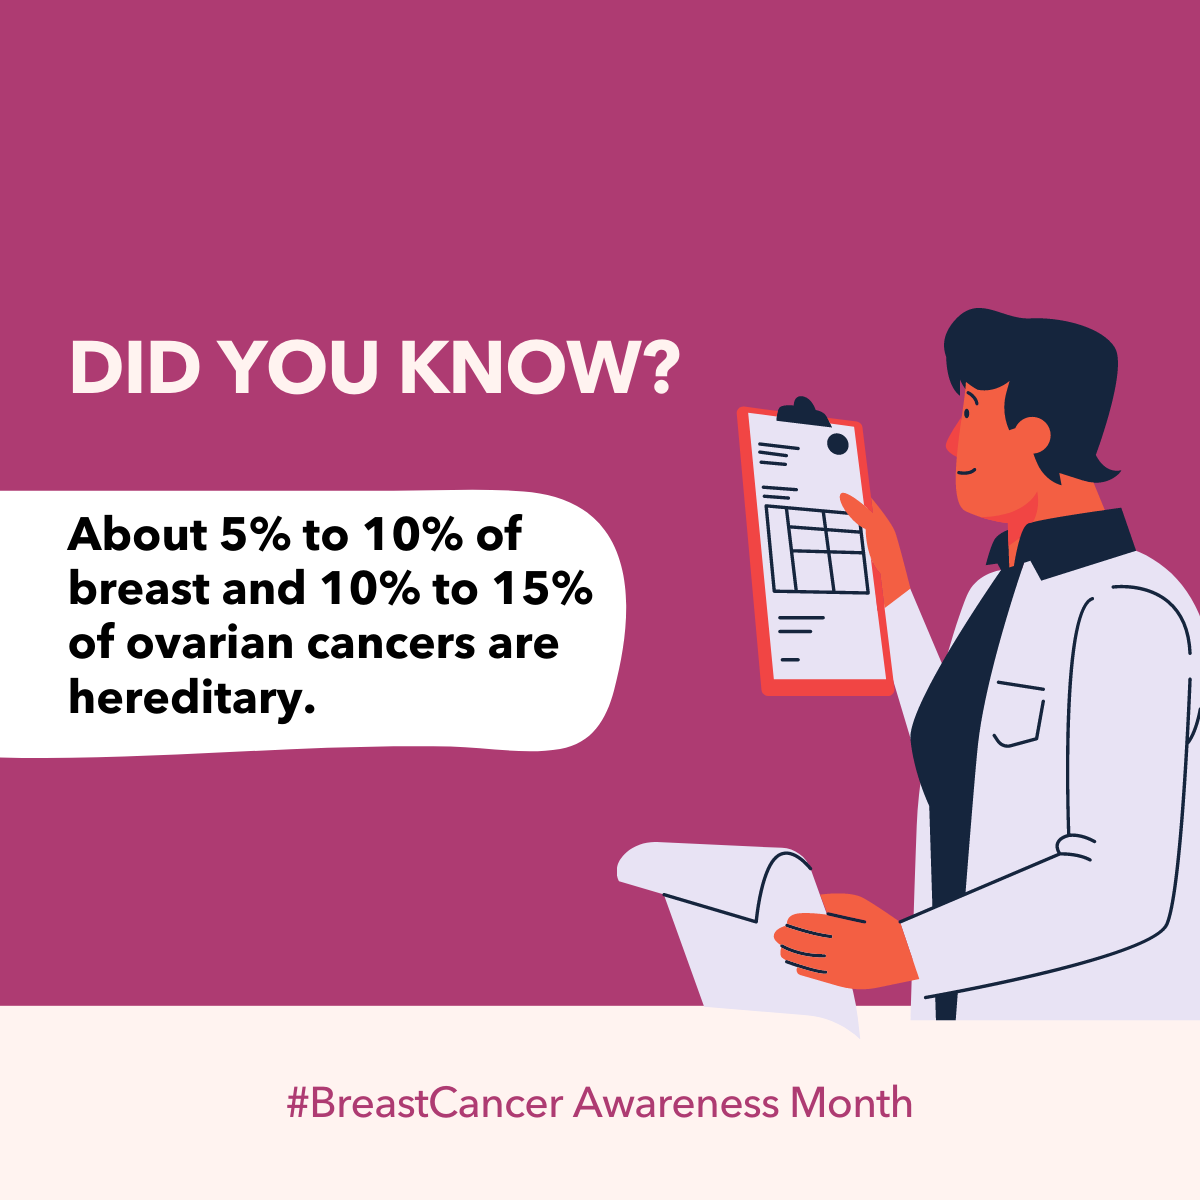 Did you know that 5% to 10% of breast cancer cases are hereditary?